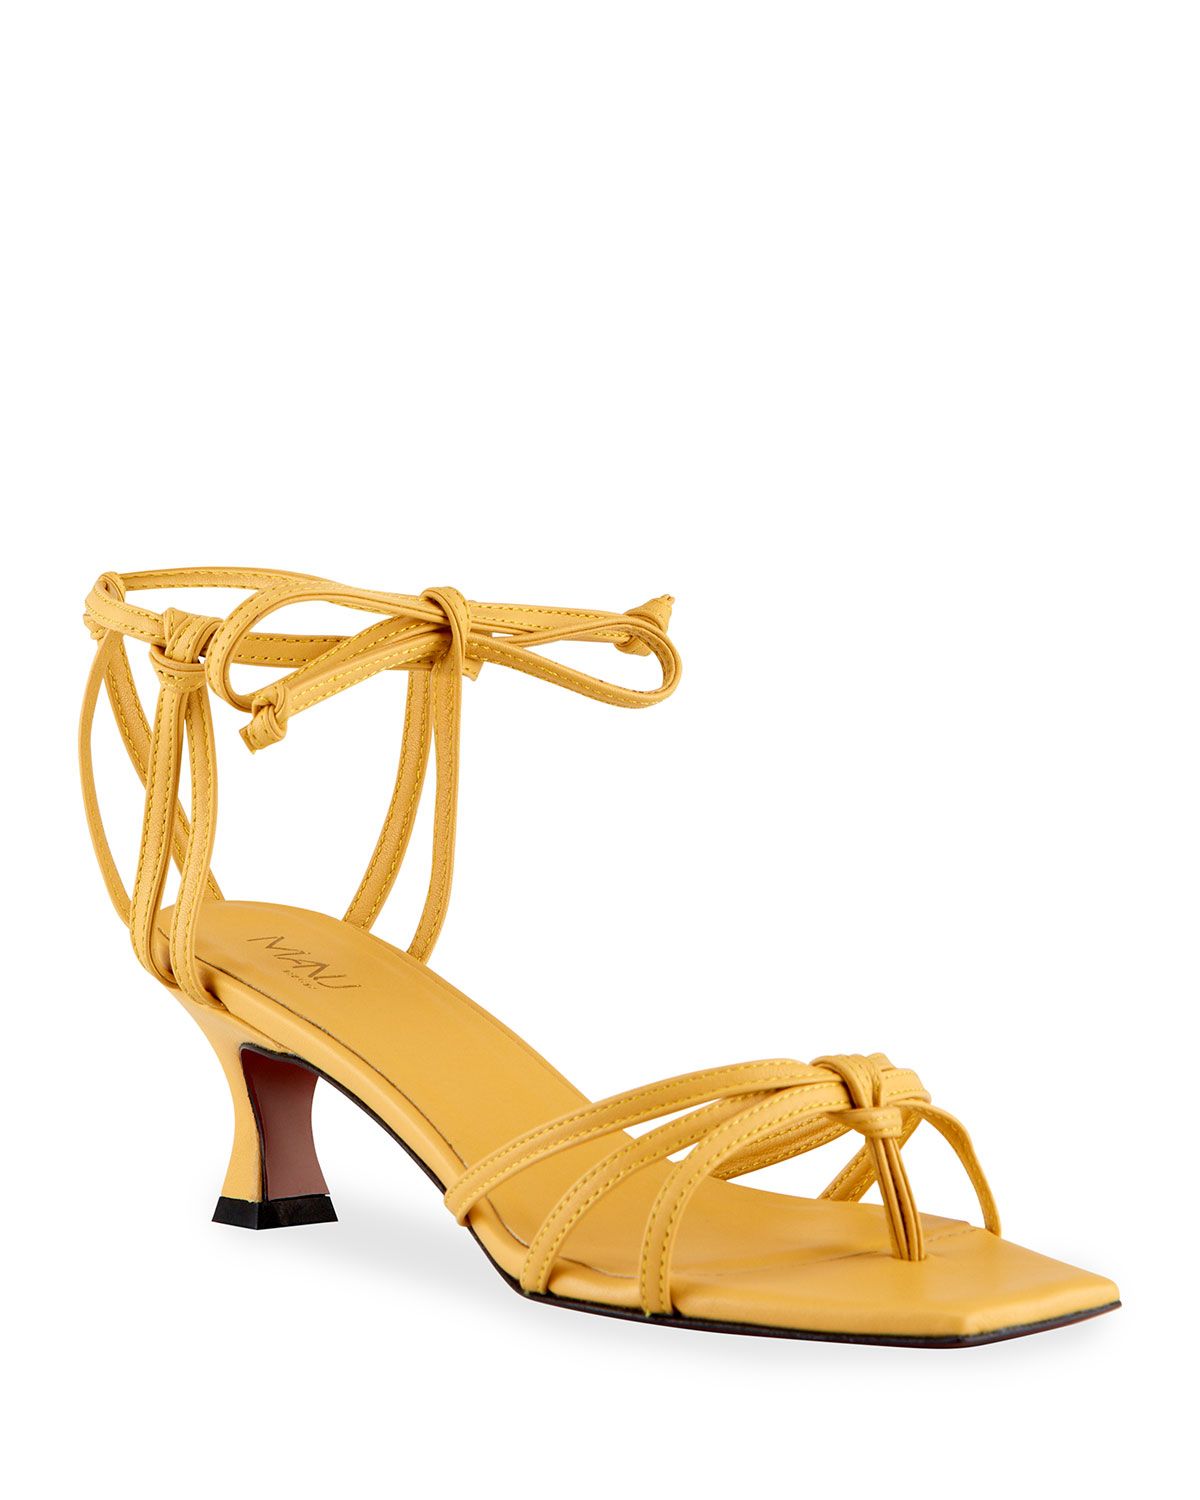 50mm Calfskin Strappy Ankle-Tie Sandals, Yellow | Neiman Marcus